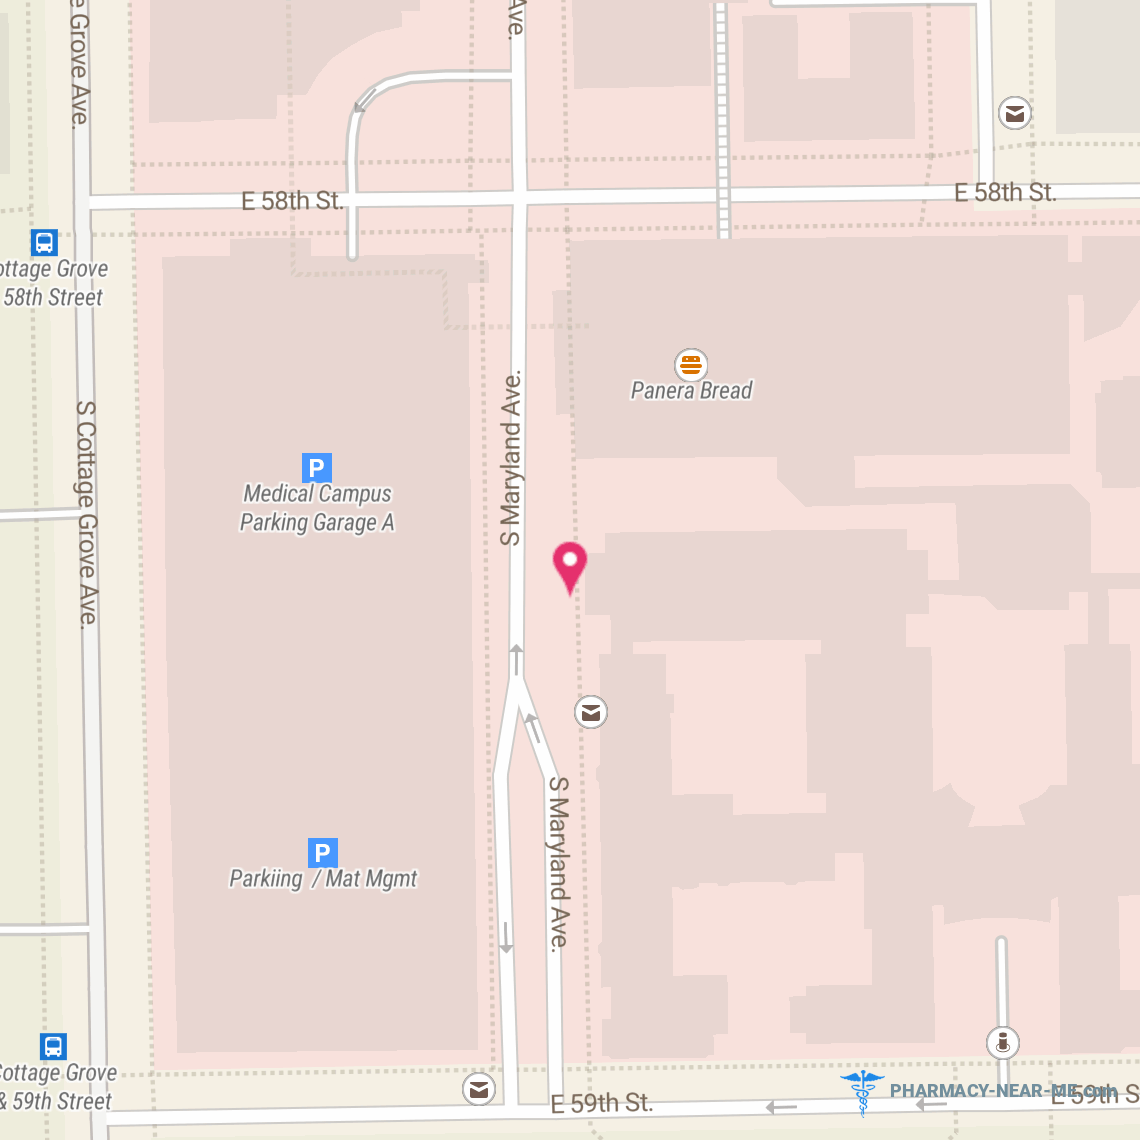 THE UNIVERSITY OF CHICAGO MEDICAL CENTER - Pharmacy Hours, Phone, Reviews & Information: 5841 South Maryland Avenue, Chicago, Illinois 60637, United States